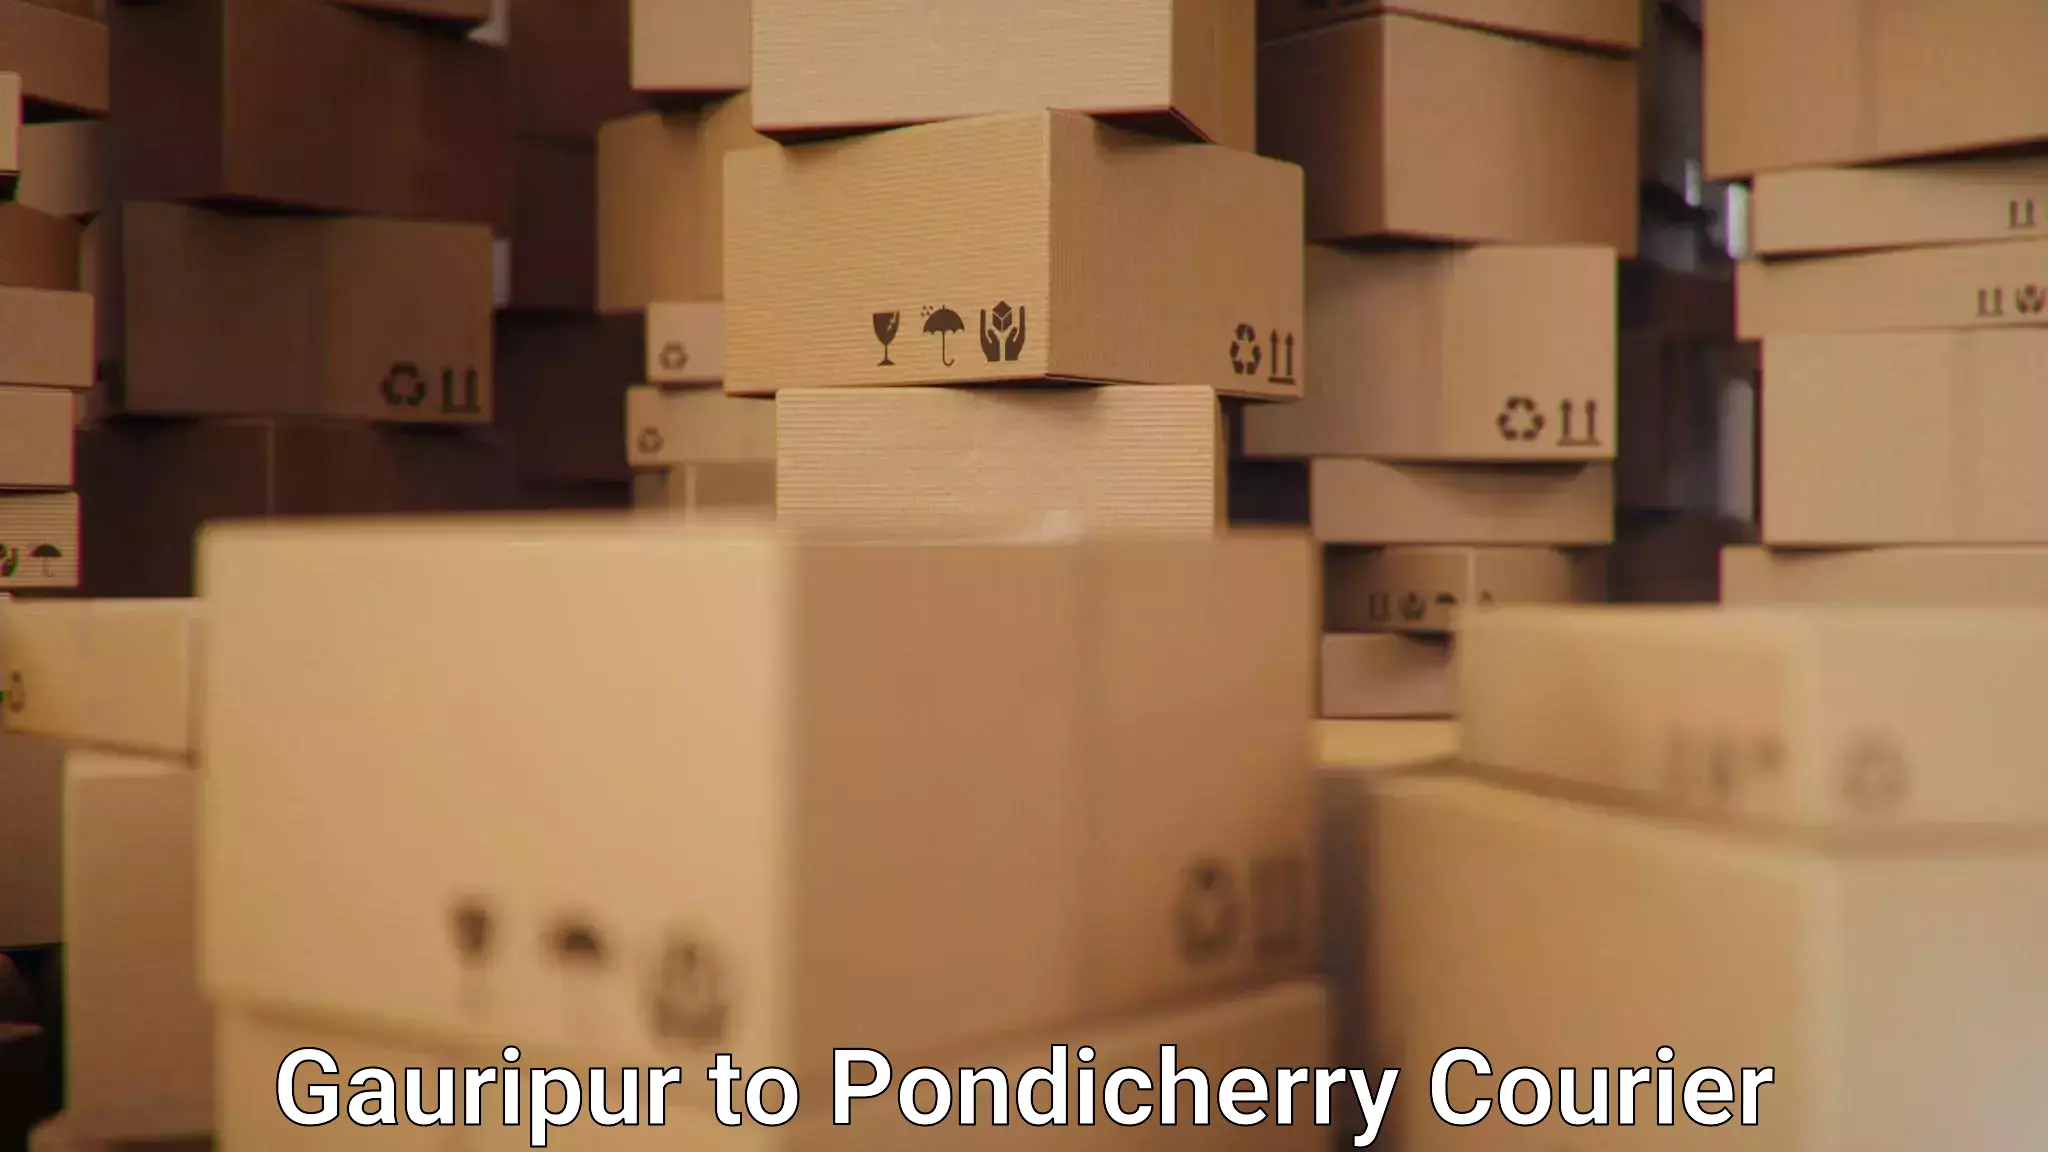 On-call courier service Gauripur to Pondicherry